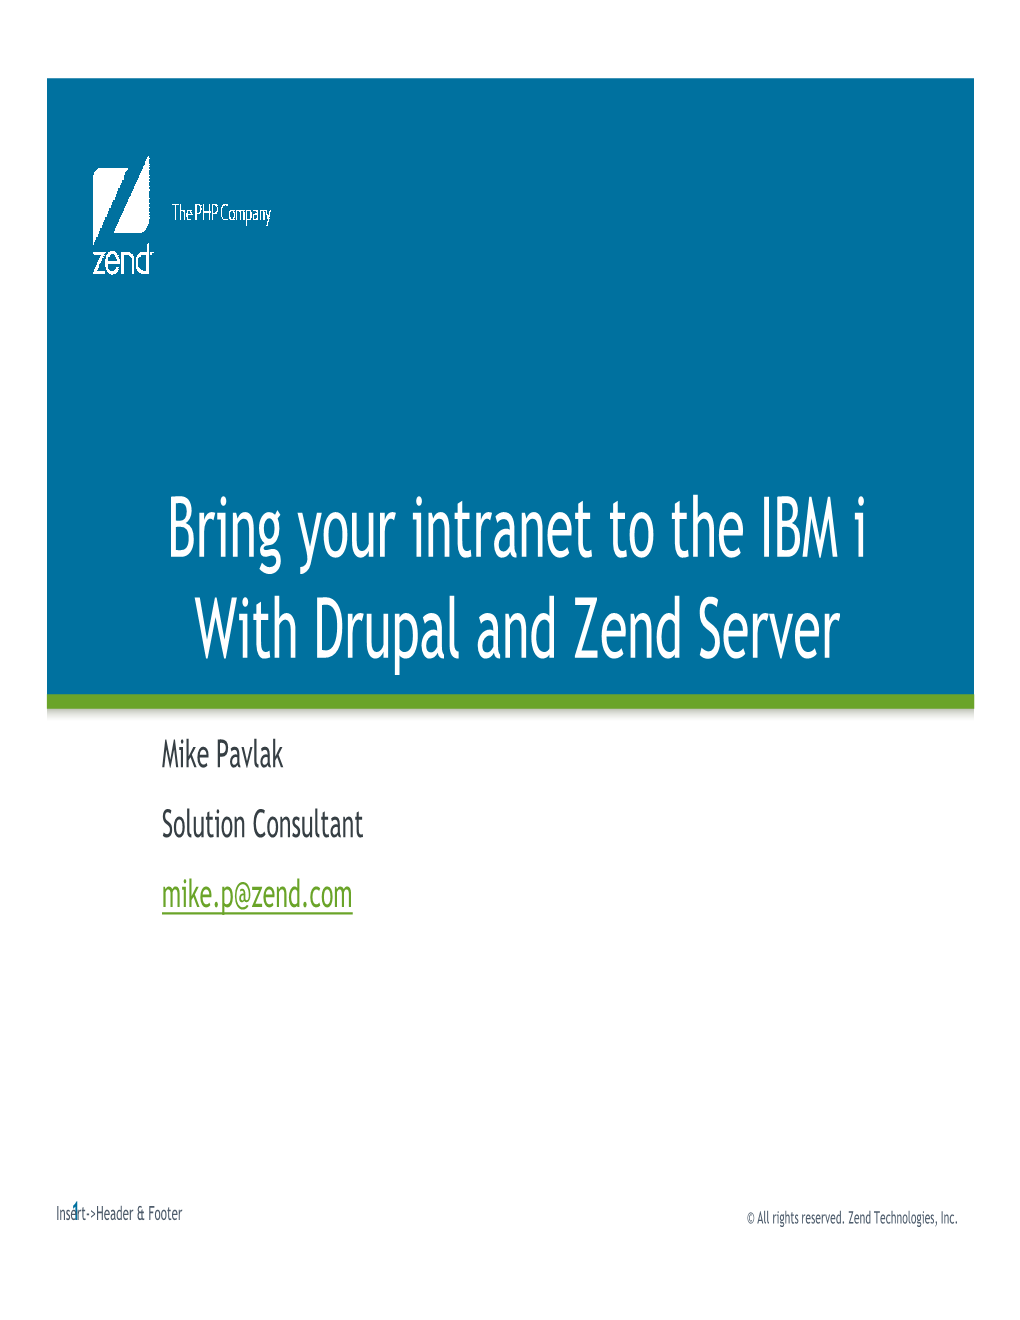 Bring Your Intranet to the IBM I with Drupal and Zend Server P